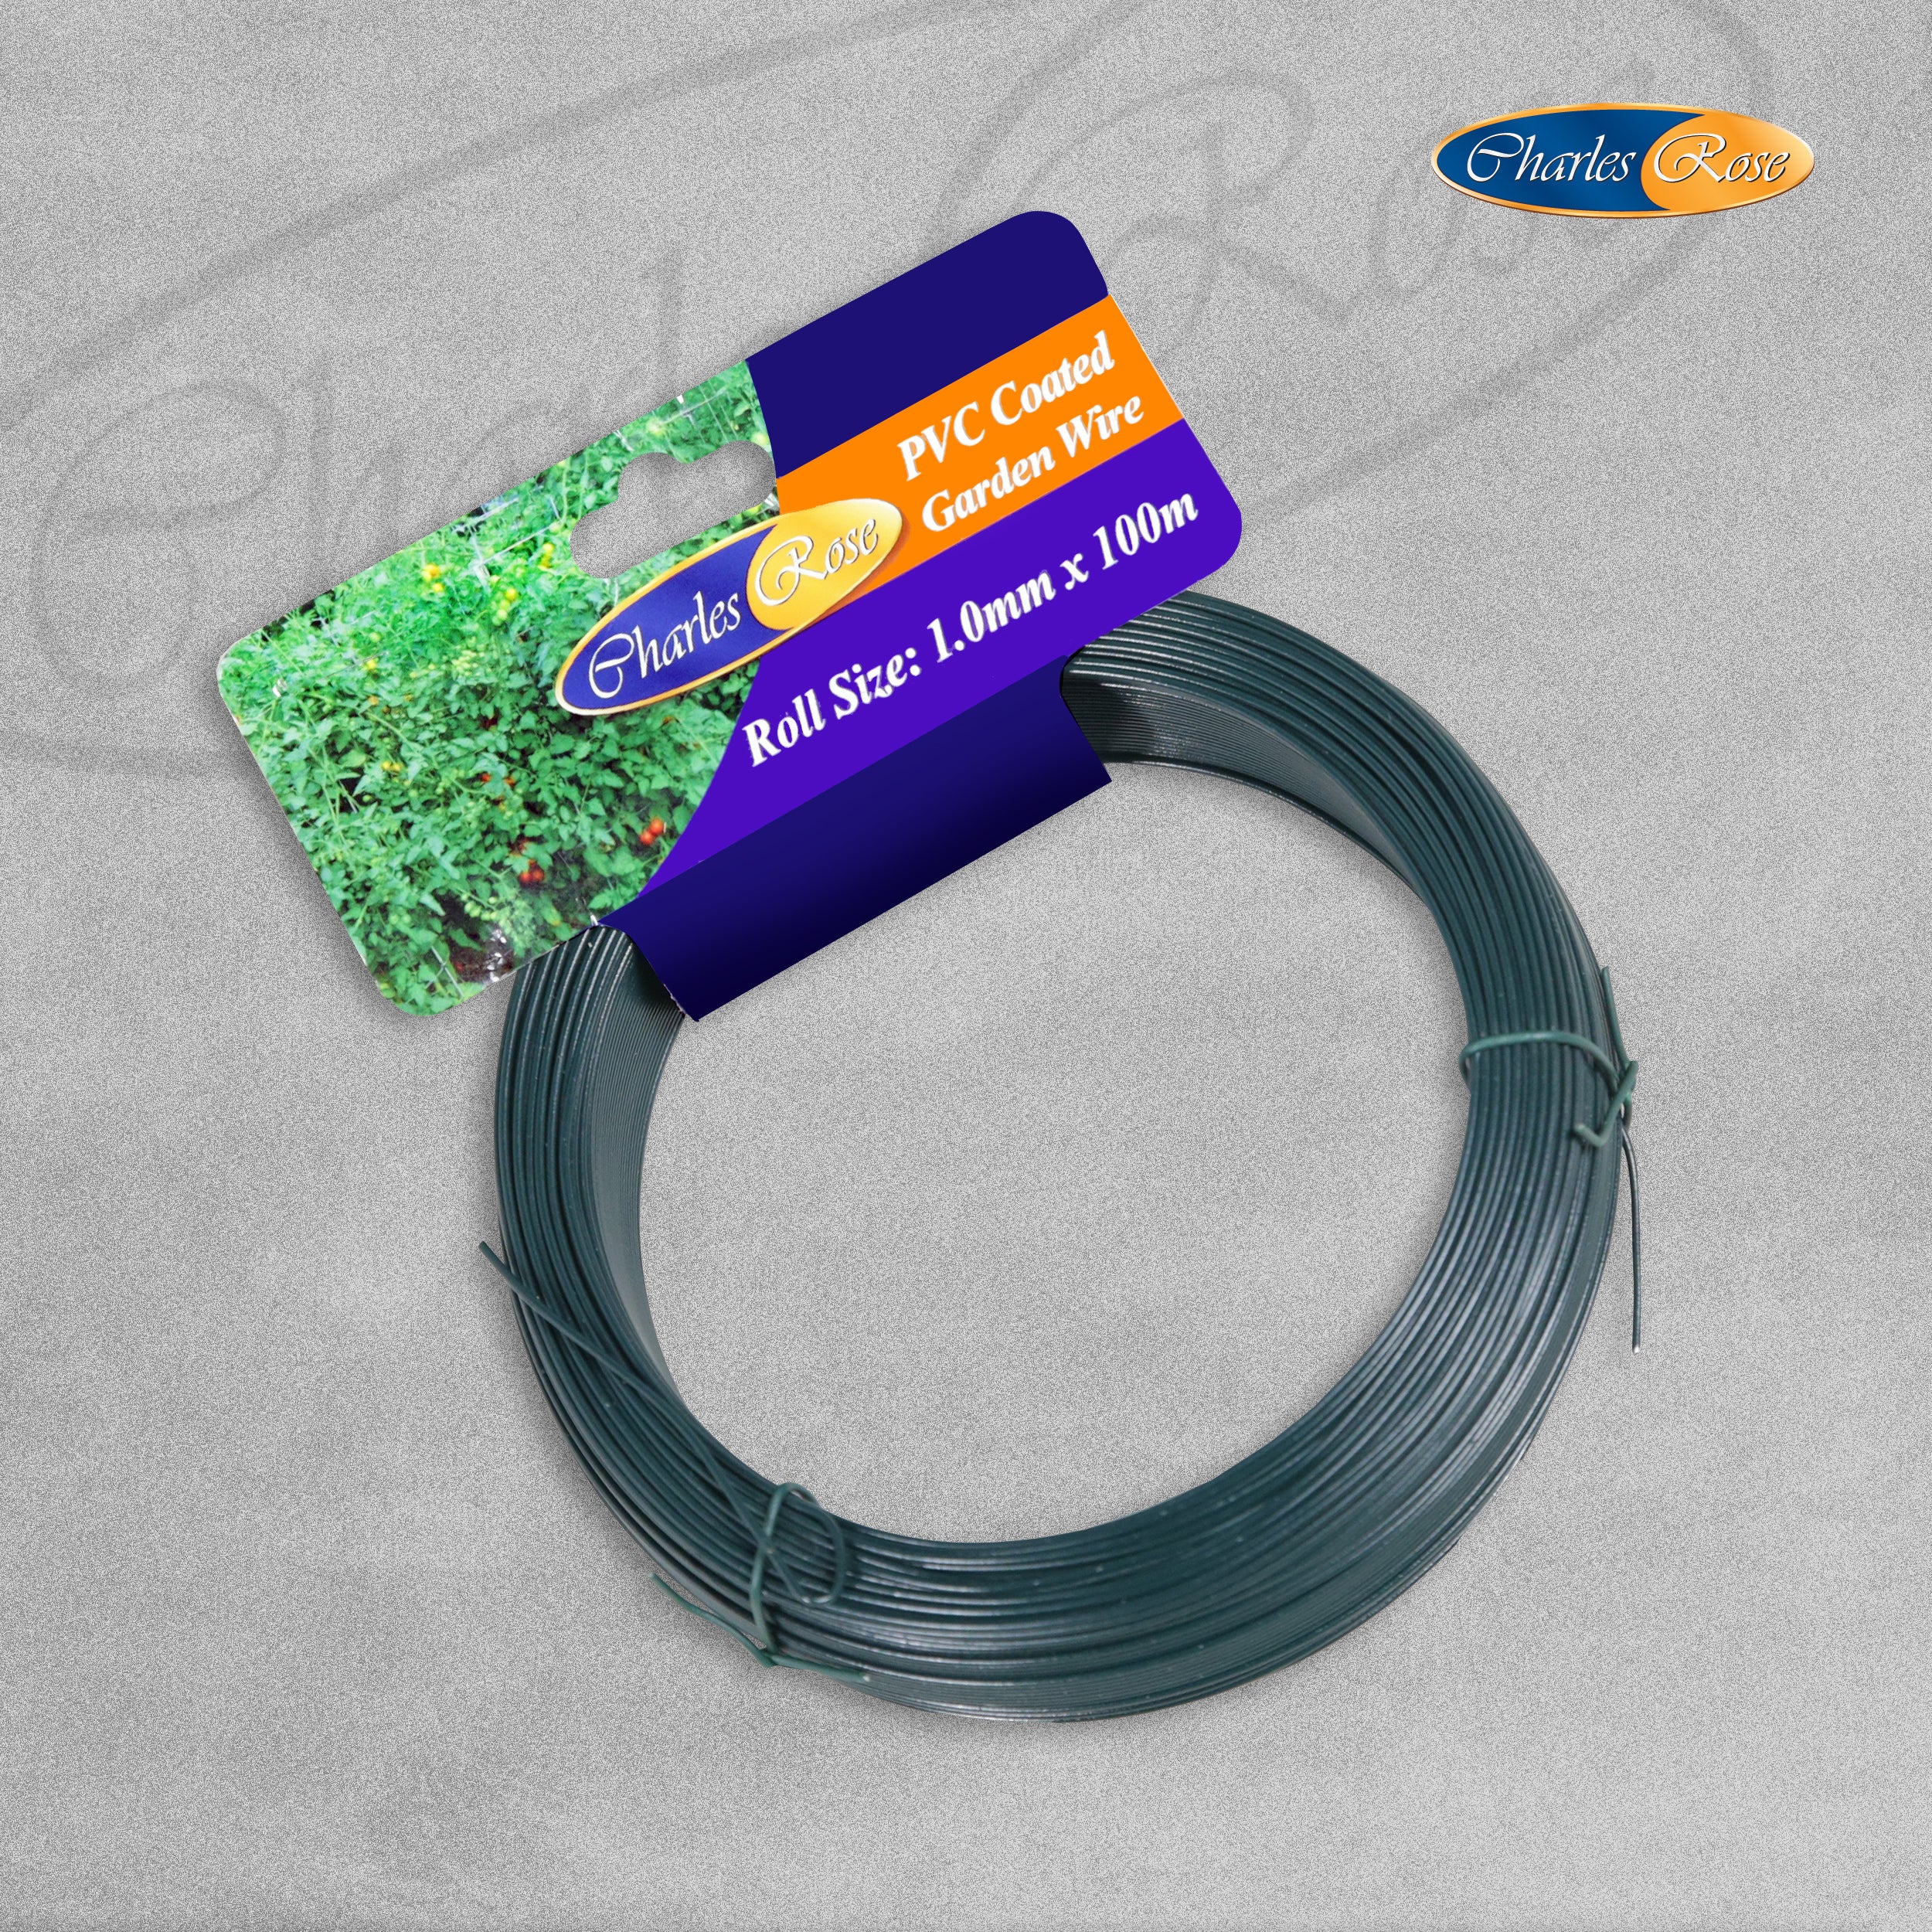 Charles Rose PVC Coated Garden Wire - 1.0mm x 100m